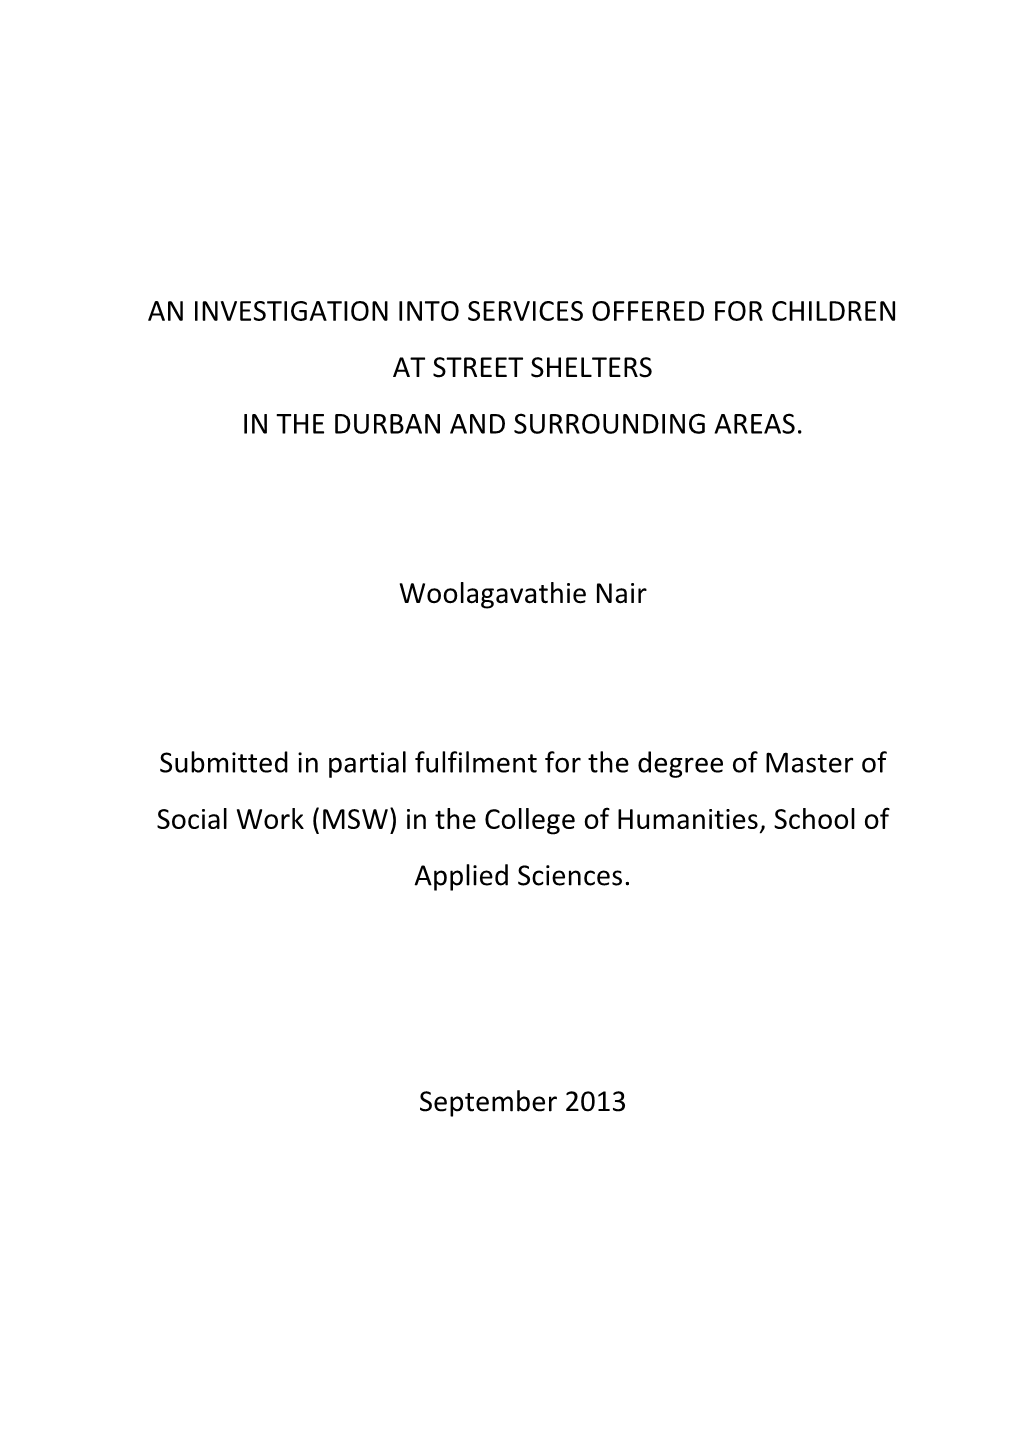 An Investigation Into Services Offered for Children at Street Shelters in the Durban and Surrounding Areas